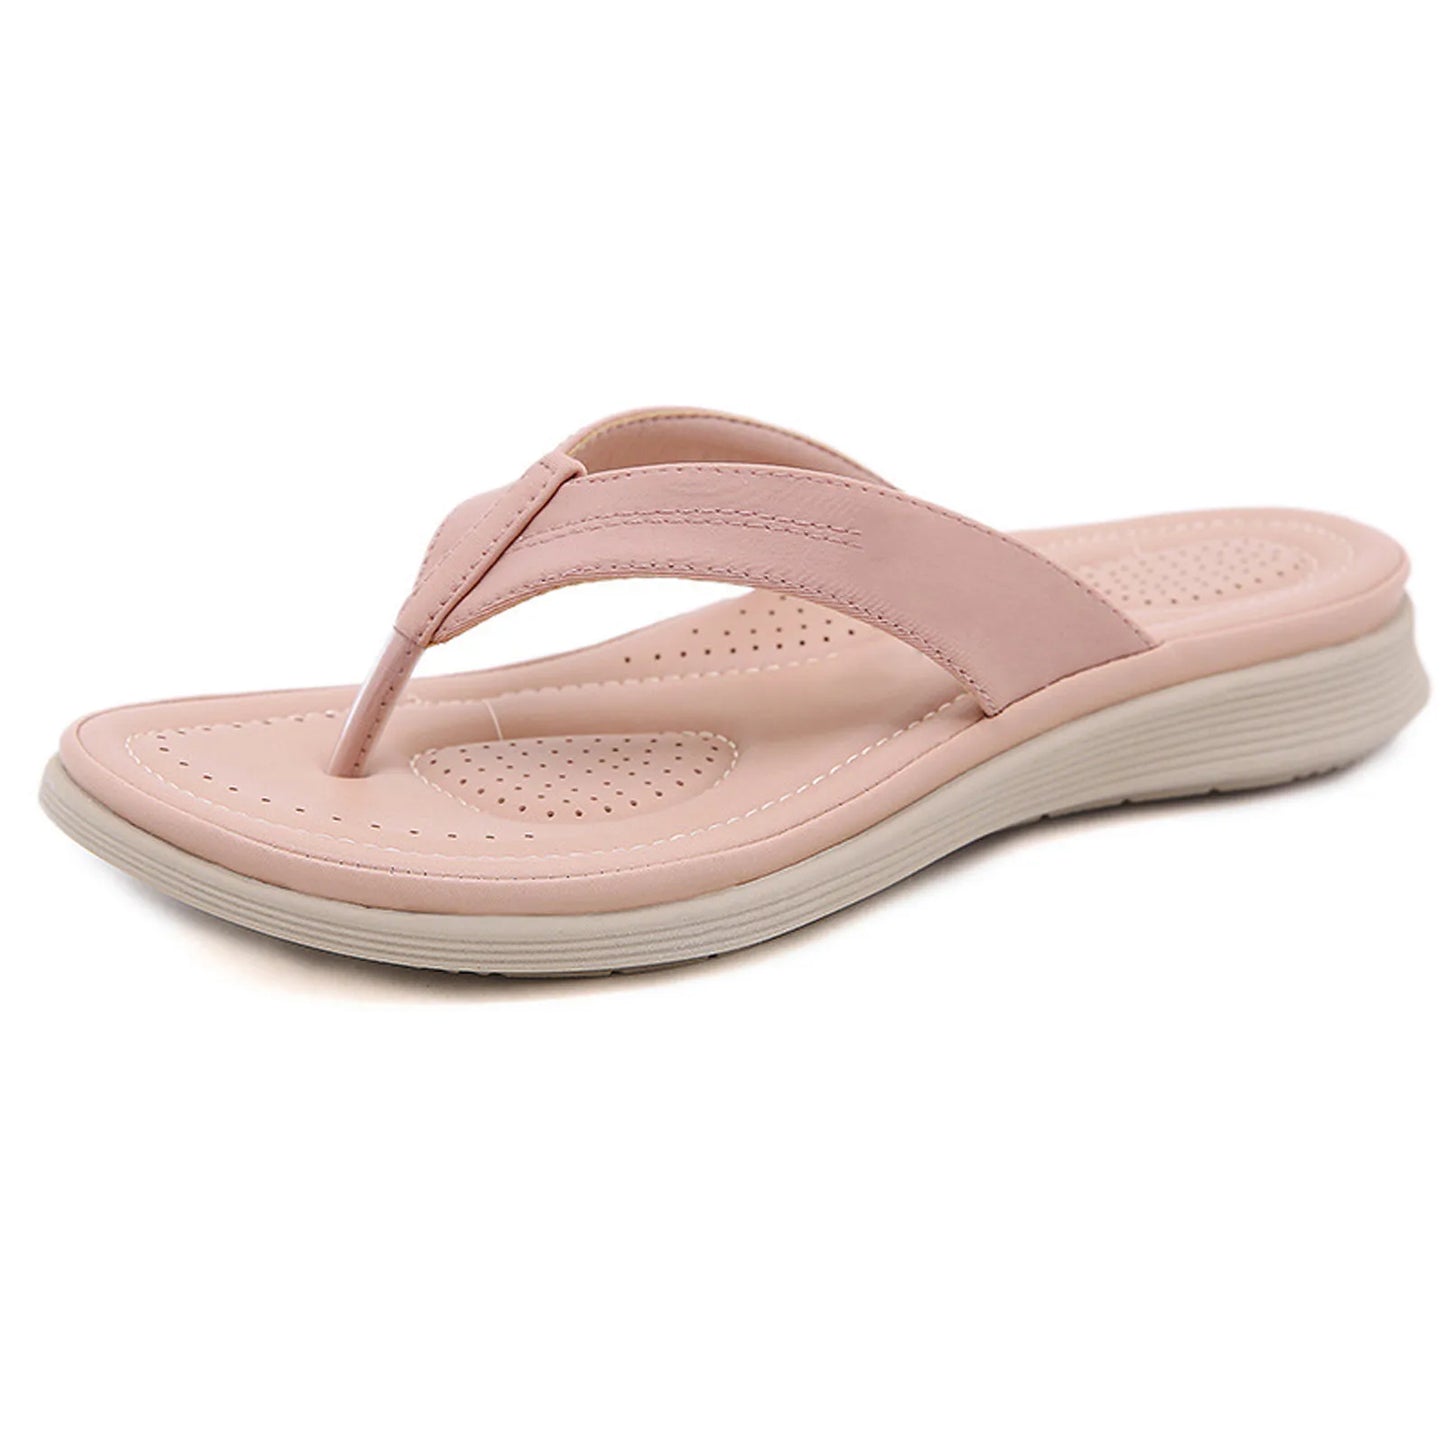 Fit Flip Flops For Women Sandals Ladies Summer Casual Solid Color/Thick Bottom Beach Large Sandals With Wedge For Women